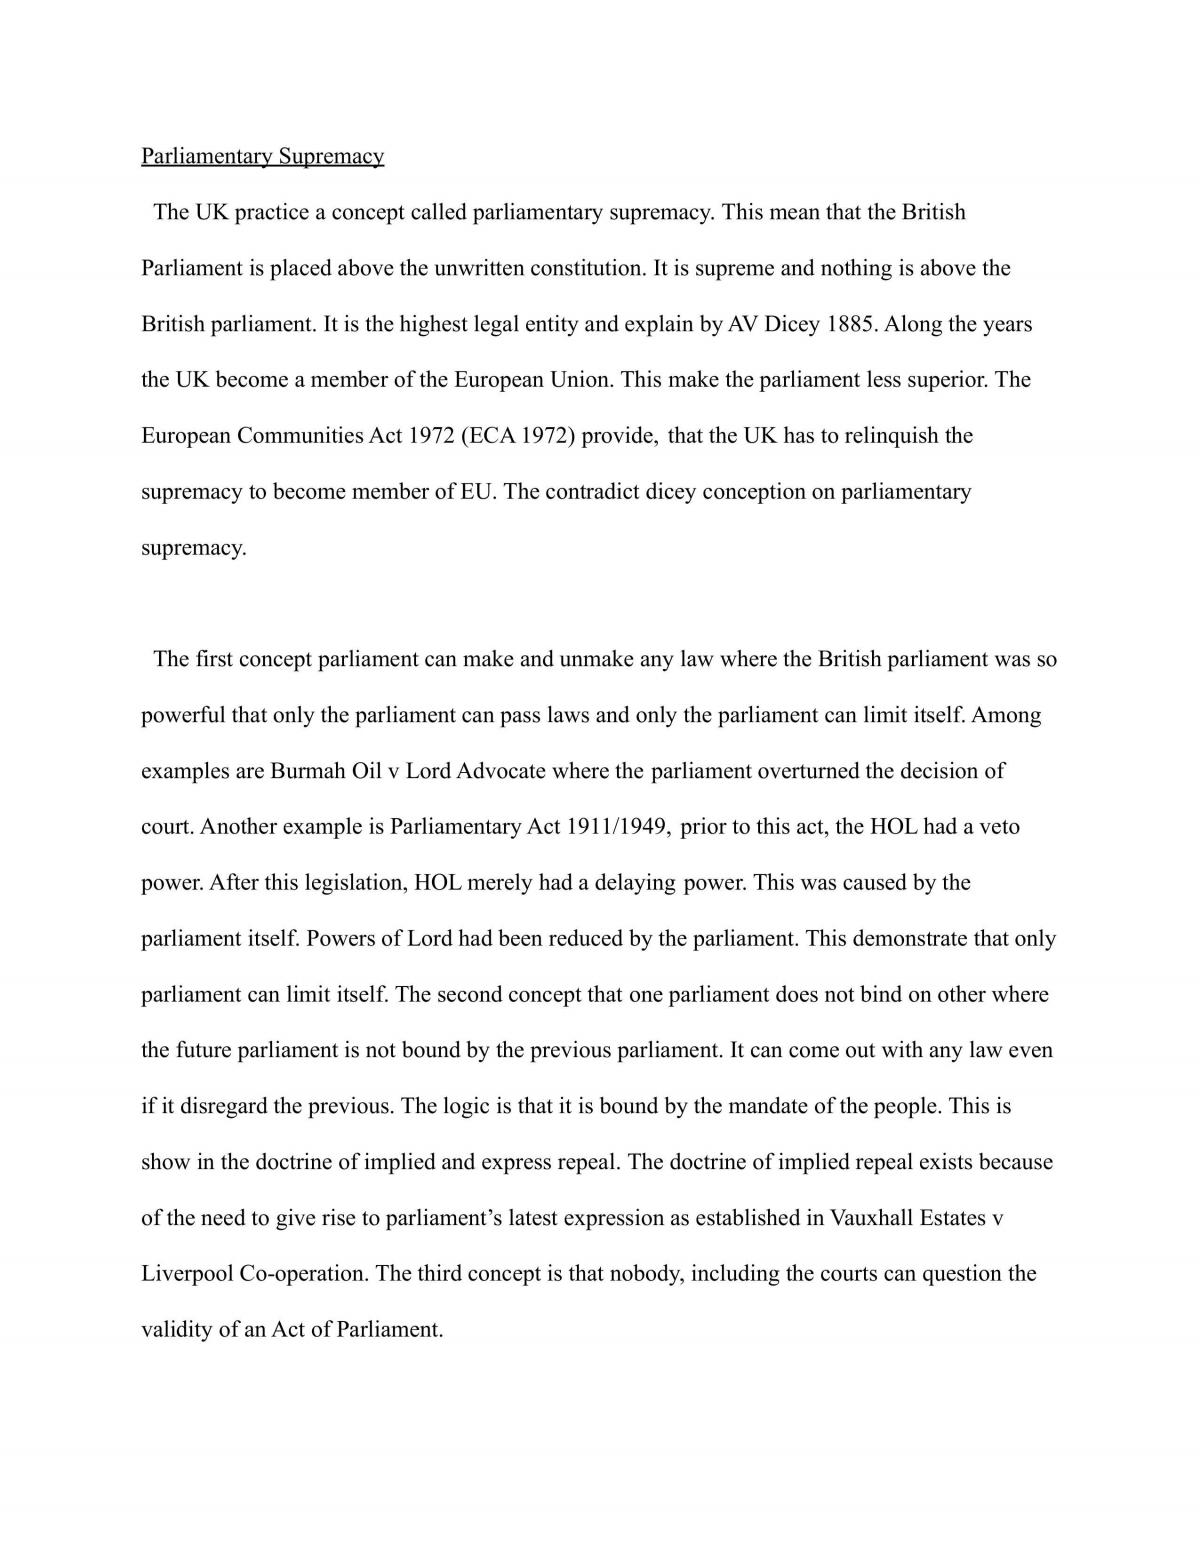 Parliamentary supremacy essay - Page 1